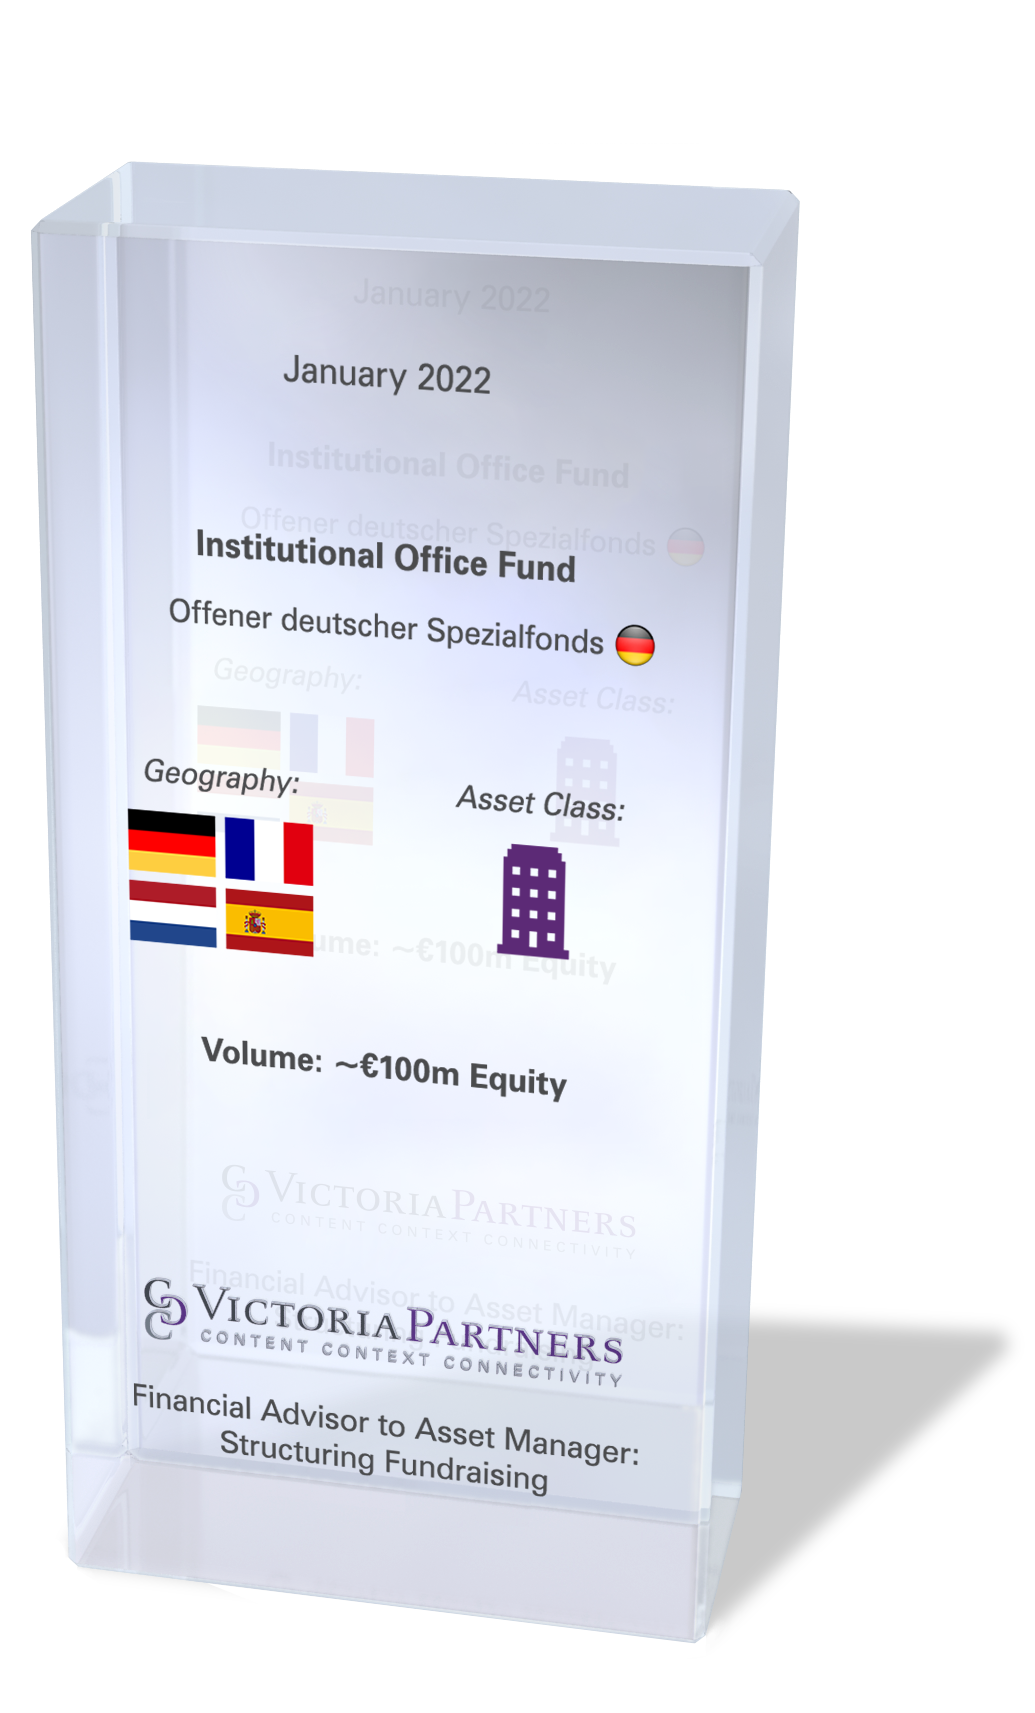 VICTORIAPARTNERS - Financial Advisor to Asset Manager: Structuring, Fundraising in Deutschland- Januar 2022